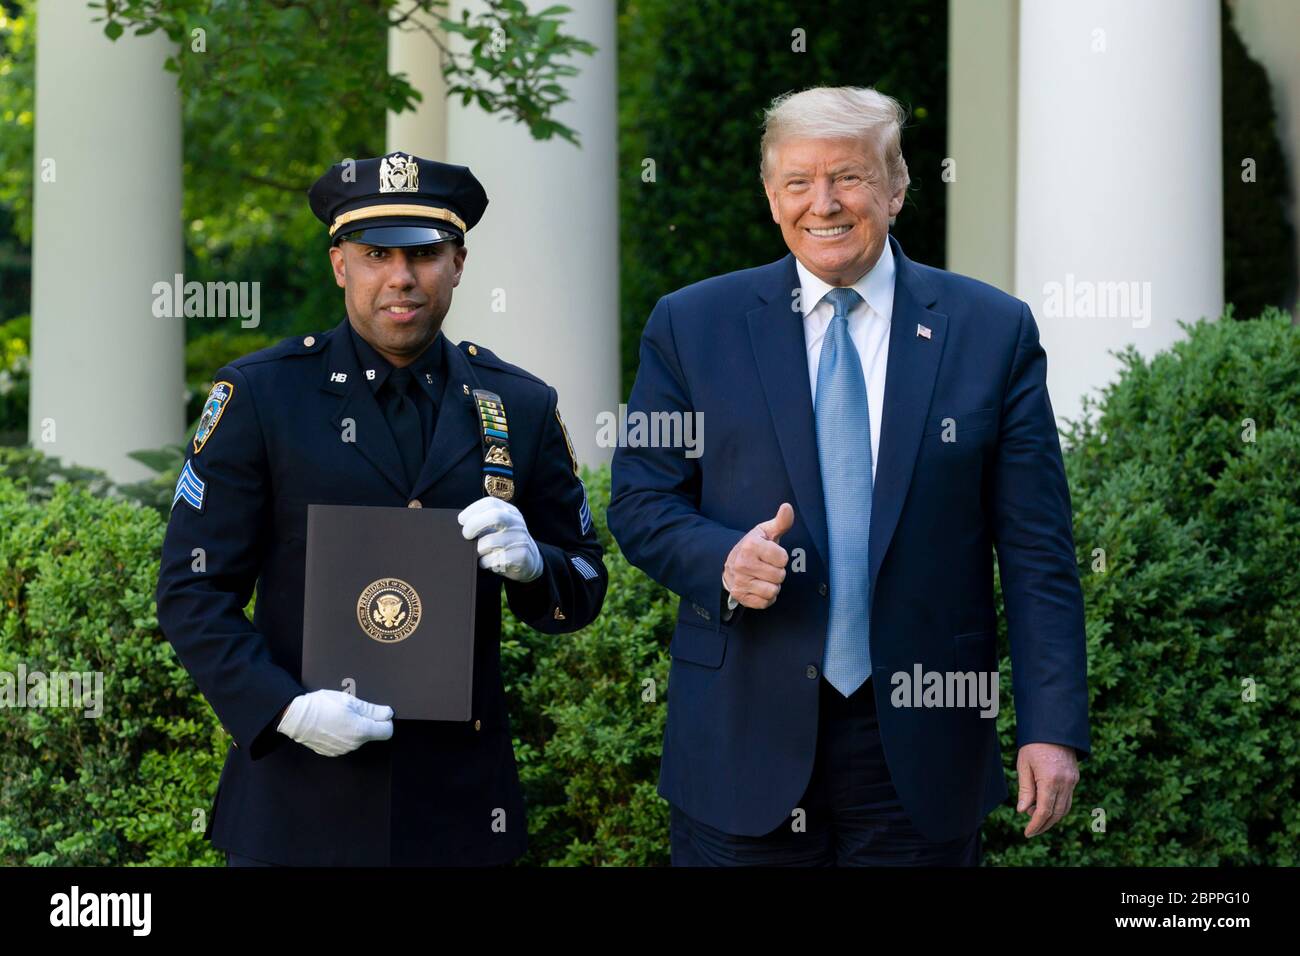 U.S. President Donald Trump presents New York City police officer Spencer Garrett, with a certificate of recognition during the Presidential Recognition Ceremony: Hard Work, Heroism, and Hope in the Rose Garden of the White House May 15, 2020 in Washington, D.C. The event honored front line workers battling the COVID-19, coronavirus pandemic. Stock Photo